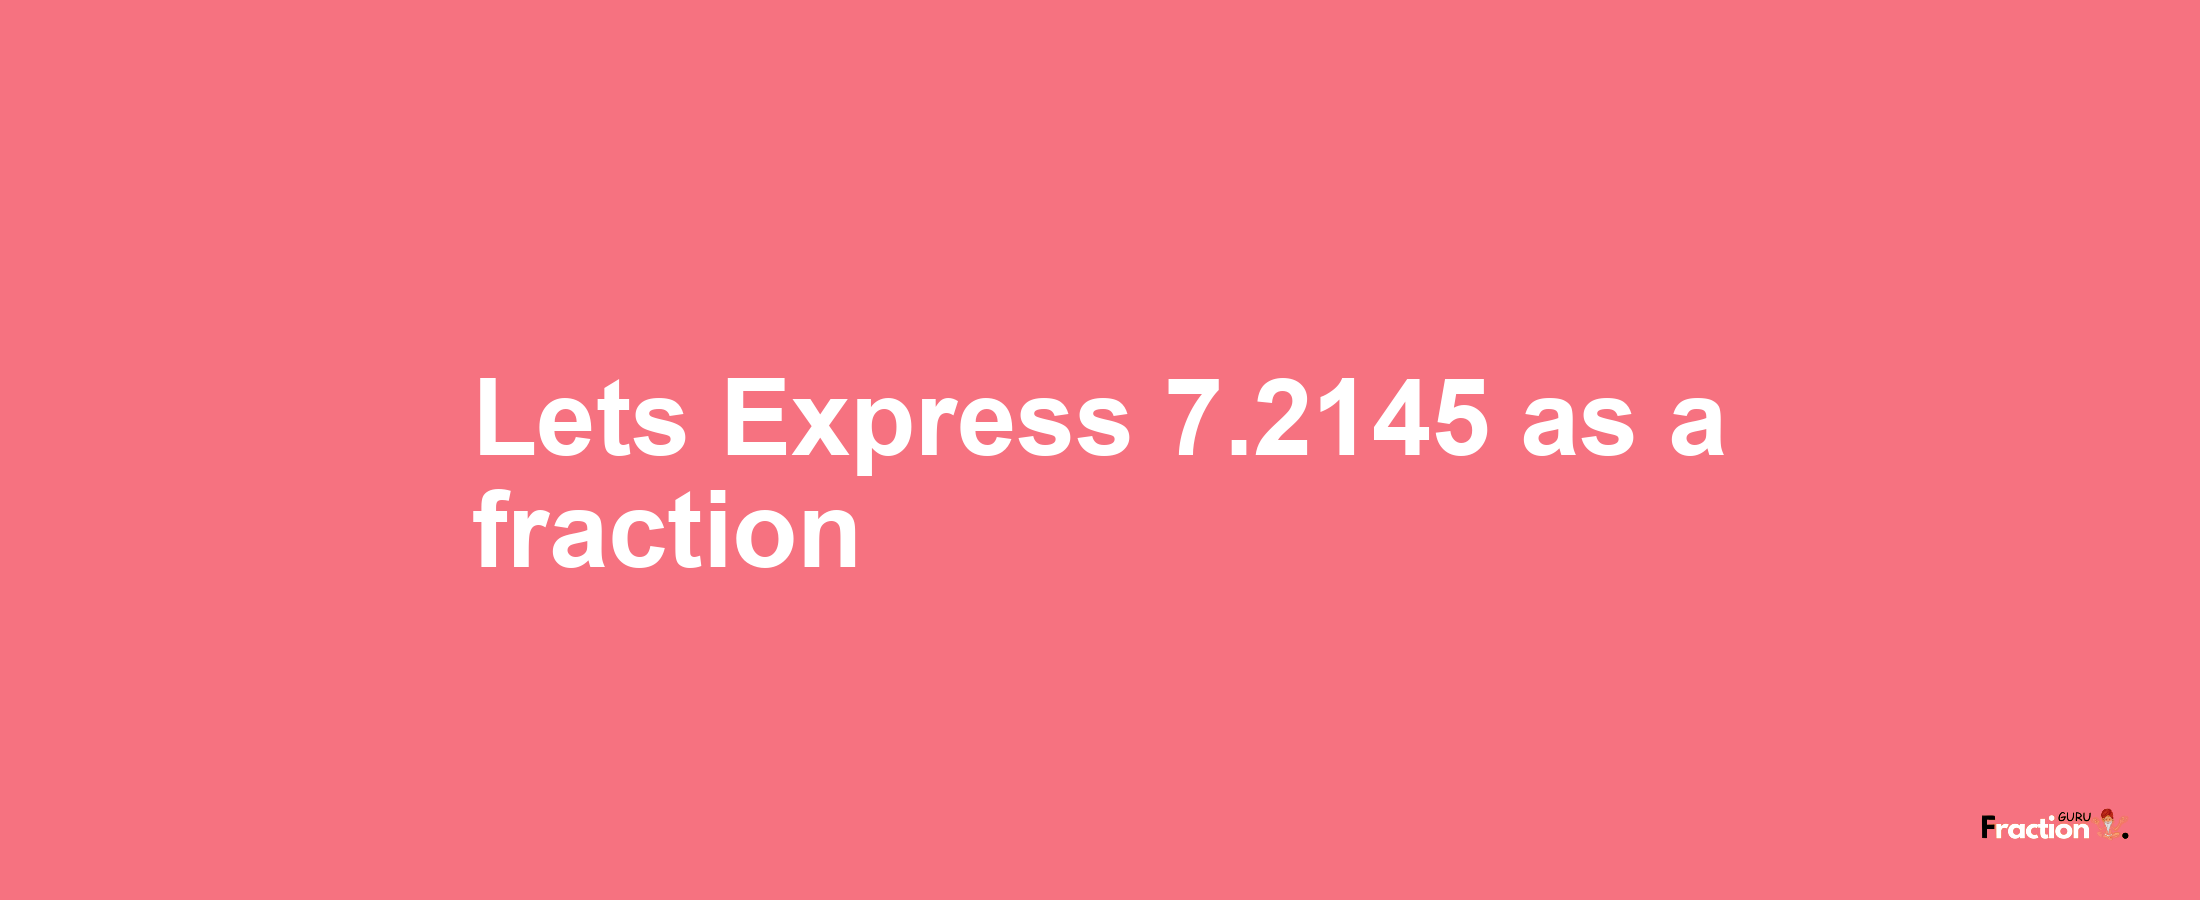 Lets Express 7.2145 as afraction